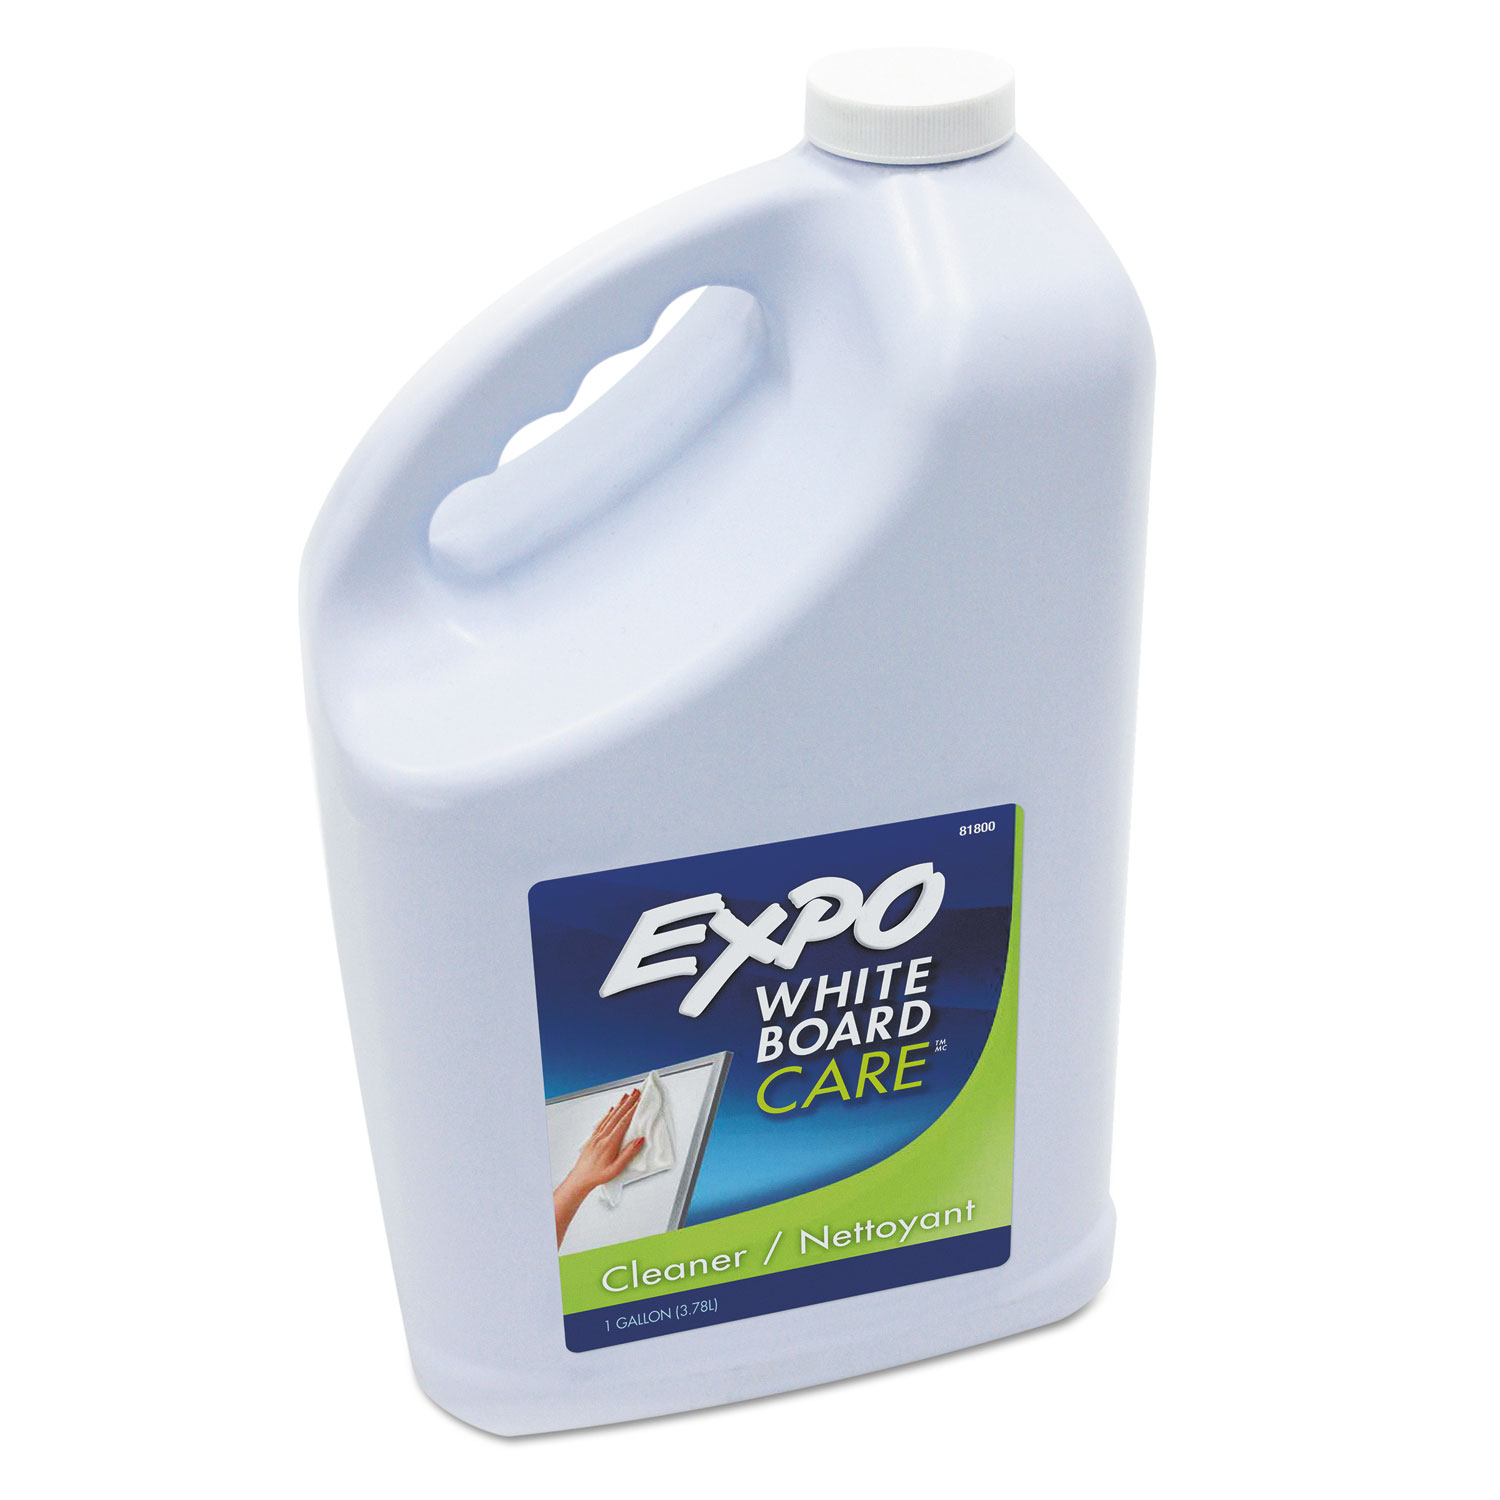 EXPO SAN81800 Dry Erase Surface Cleaner, 1gal Bottle